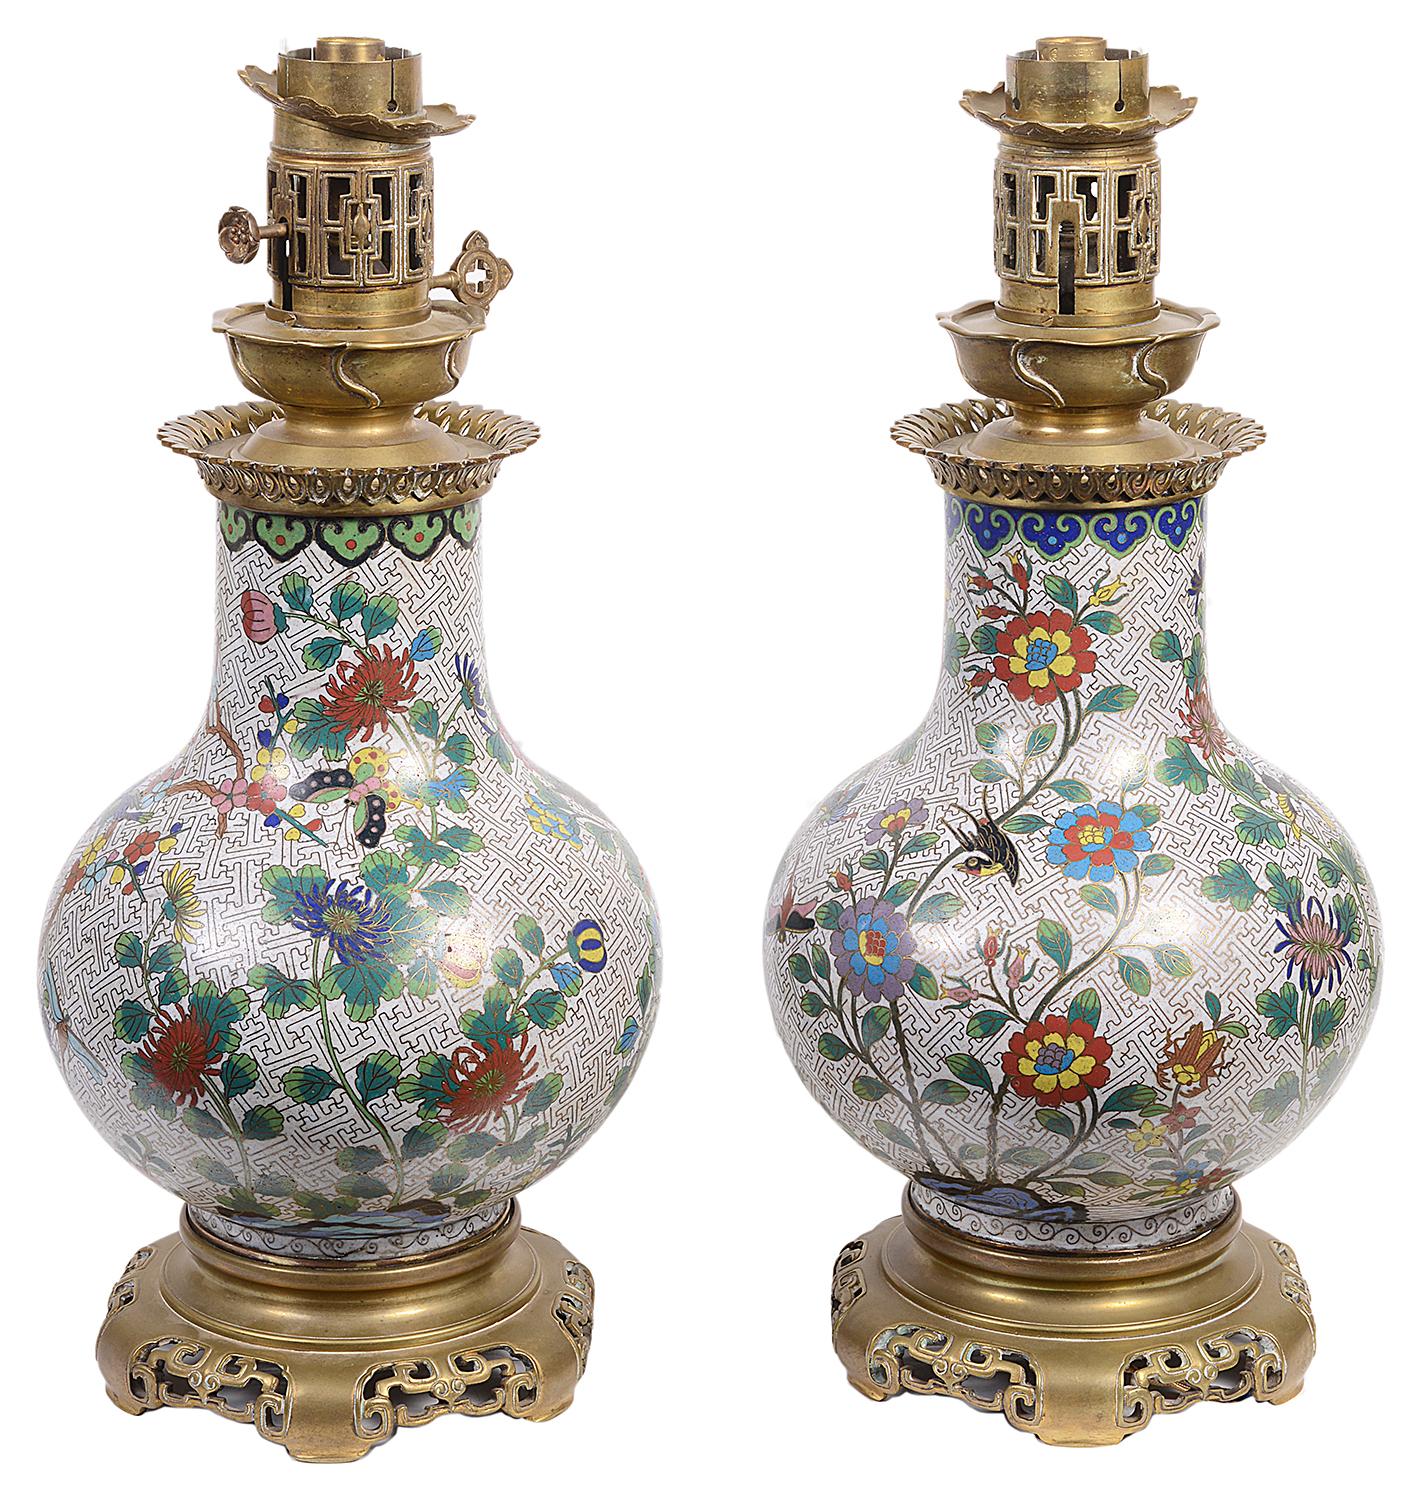 A good quality pair of French, oriental style cloisonné enamel vases / lamps, each having wonderful floral decoration with birds, butterflies and dragonflies, mounted with ormolu tops and Chinese style stands.
 